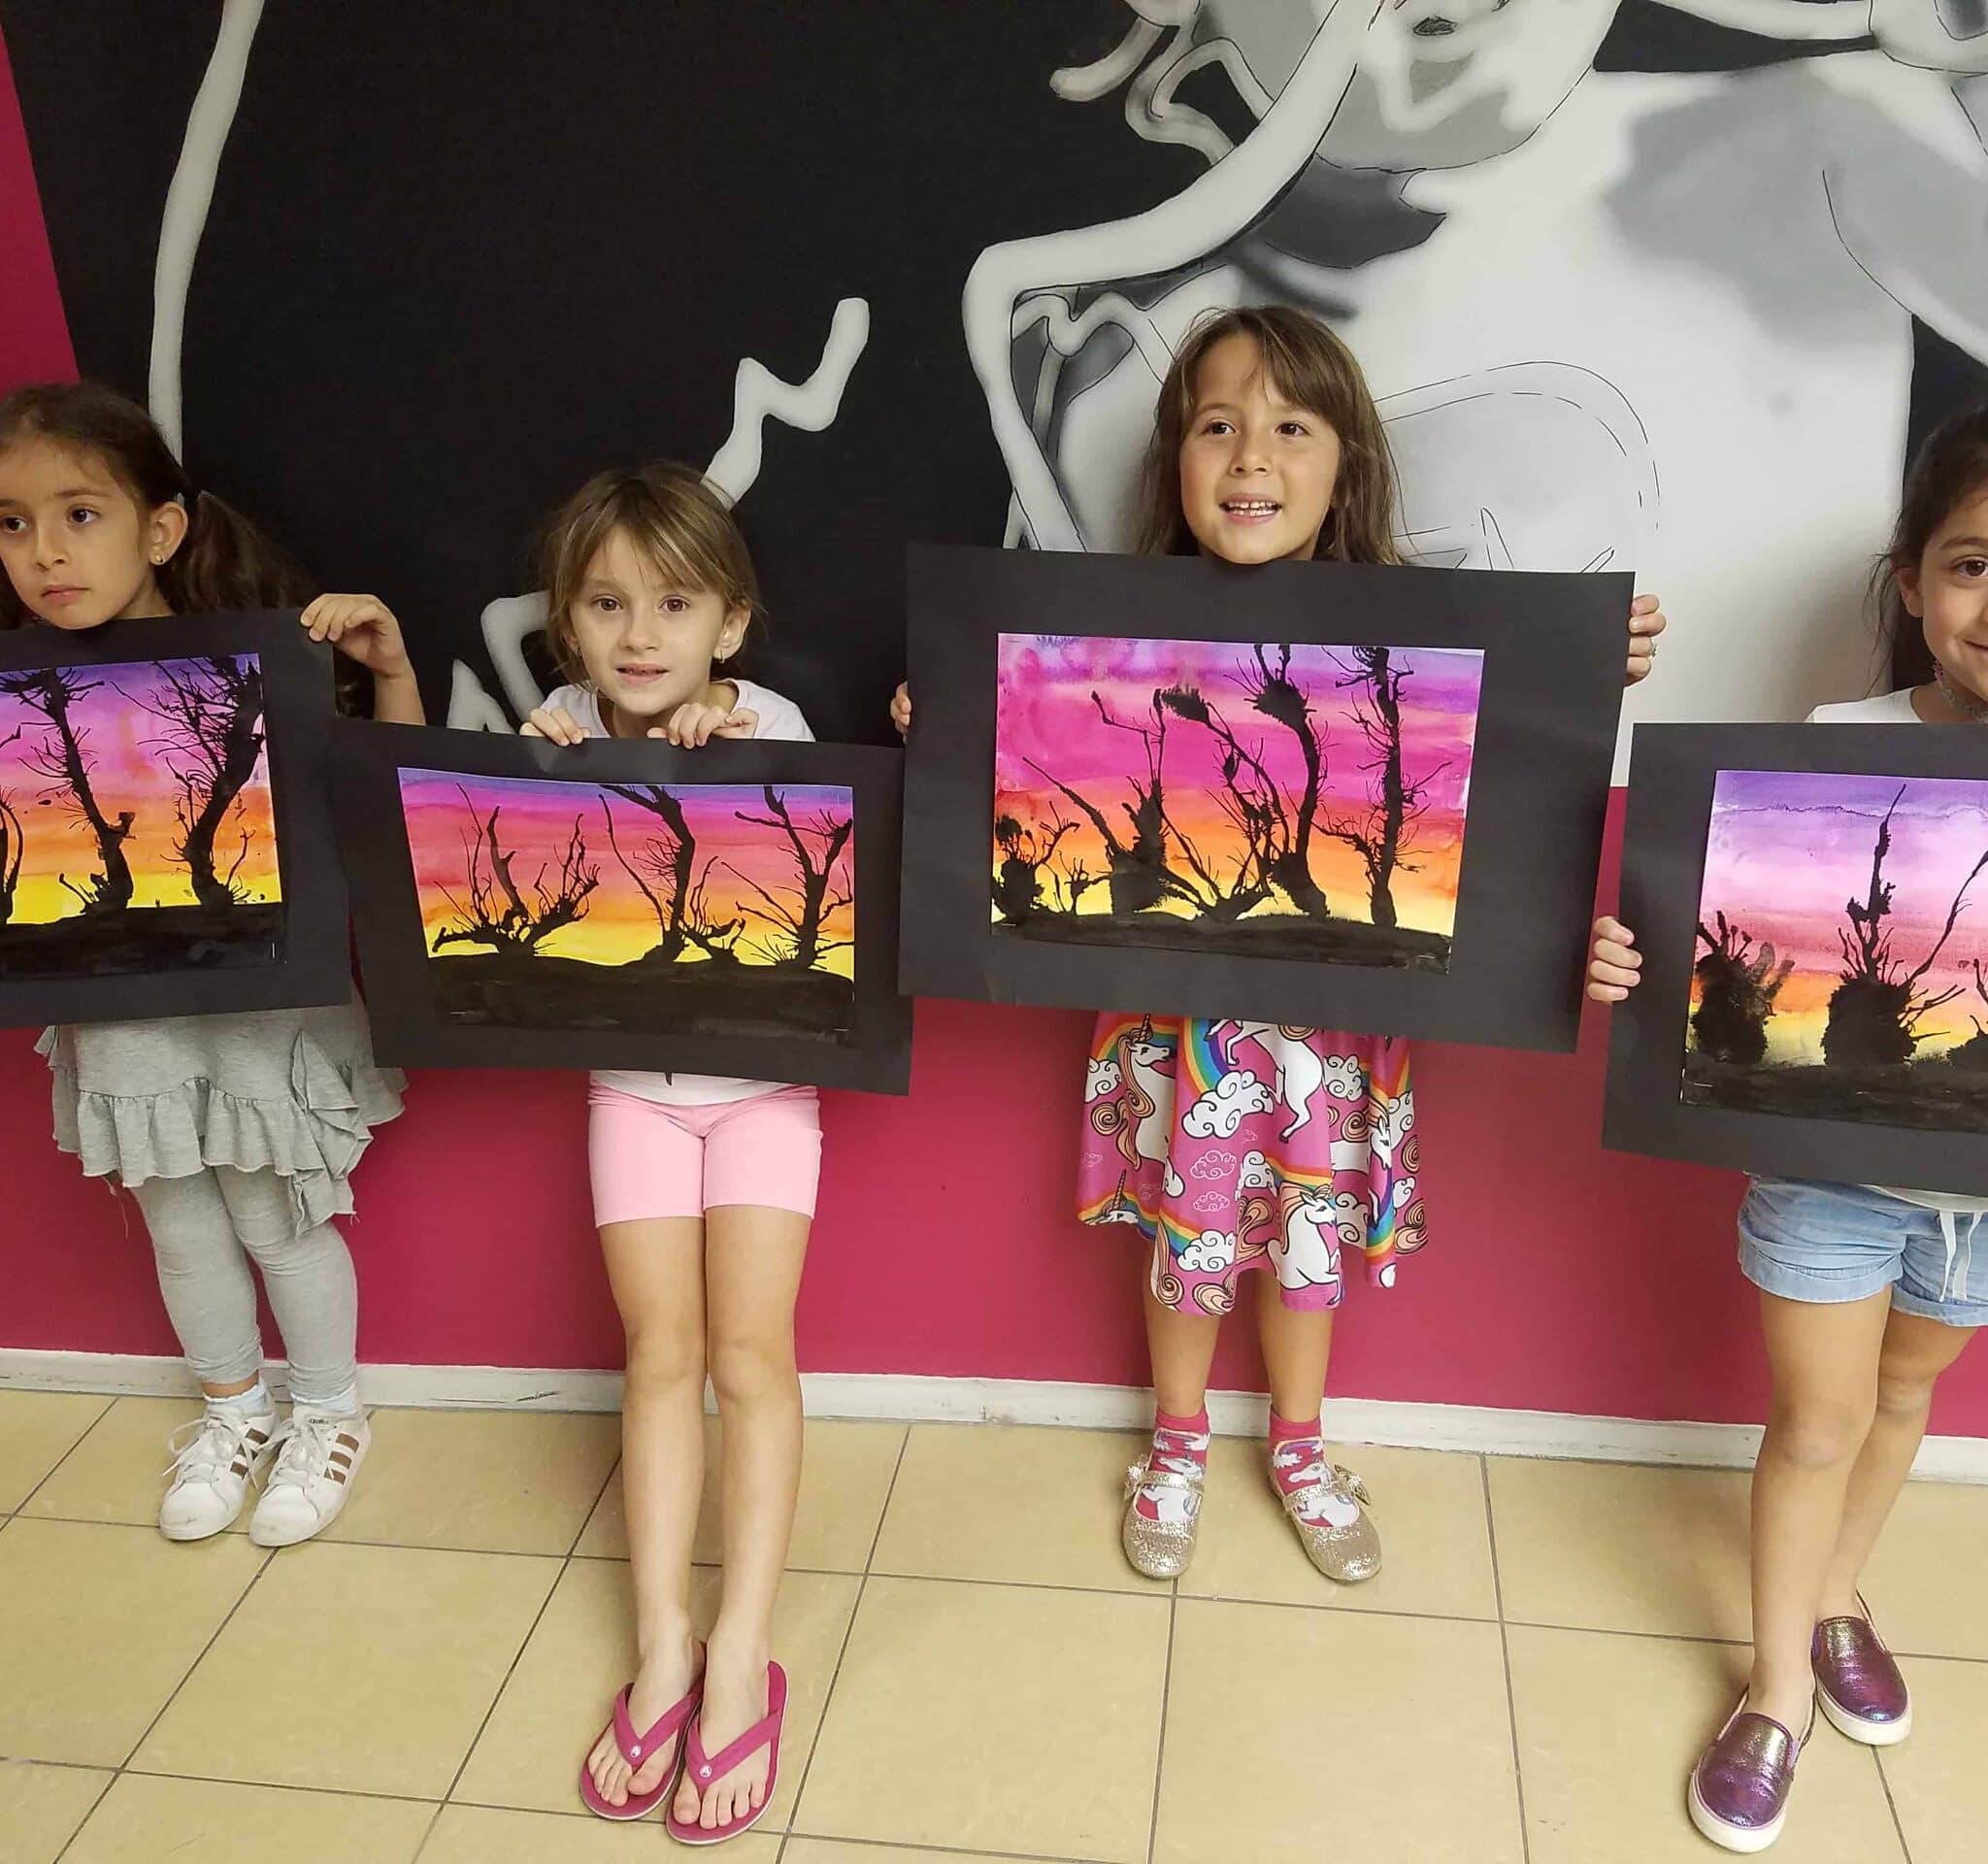 Painting Events & Art Classes for Kids in Jupiter, FL